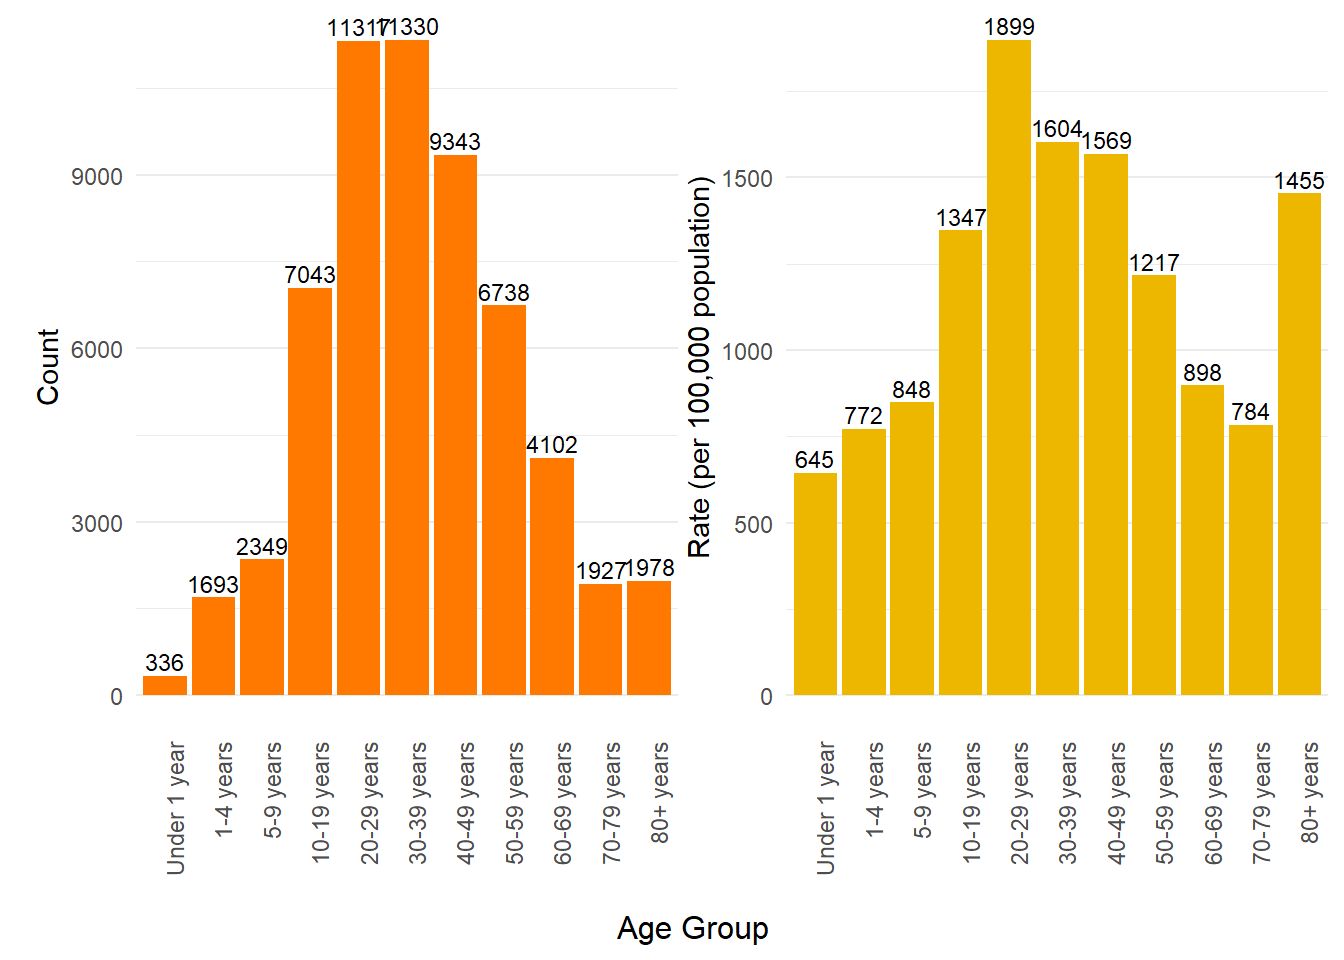 Number and rate of COVID-19 cases in Alberta by age group